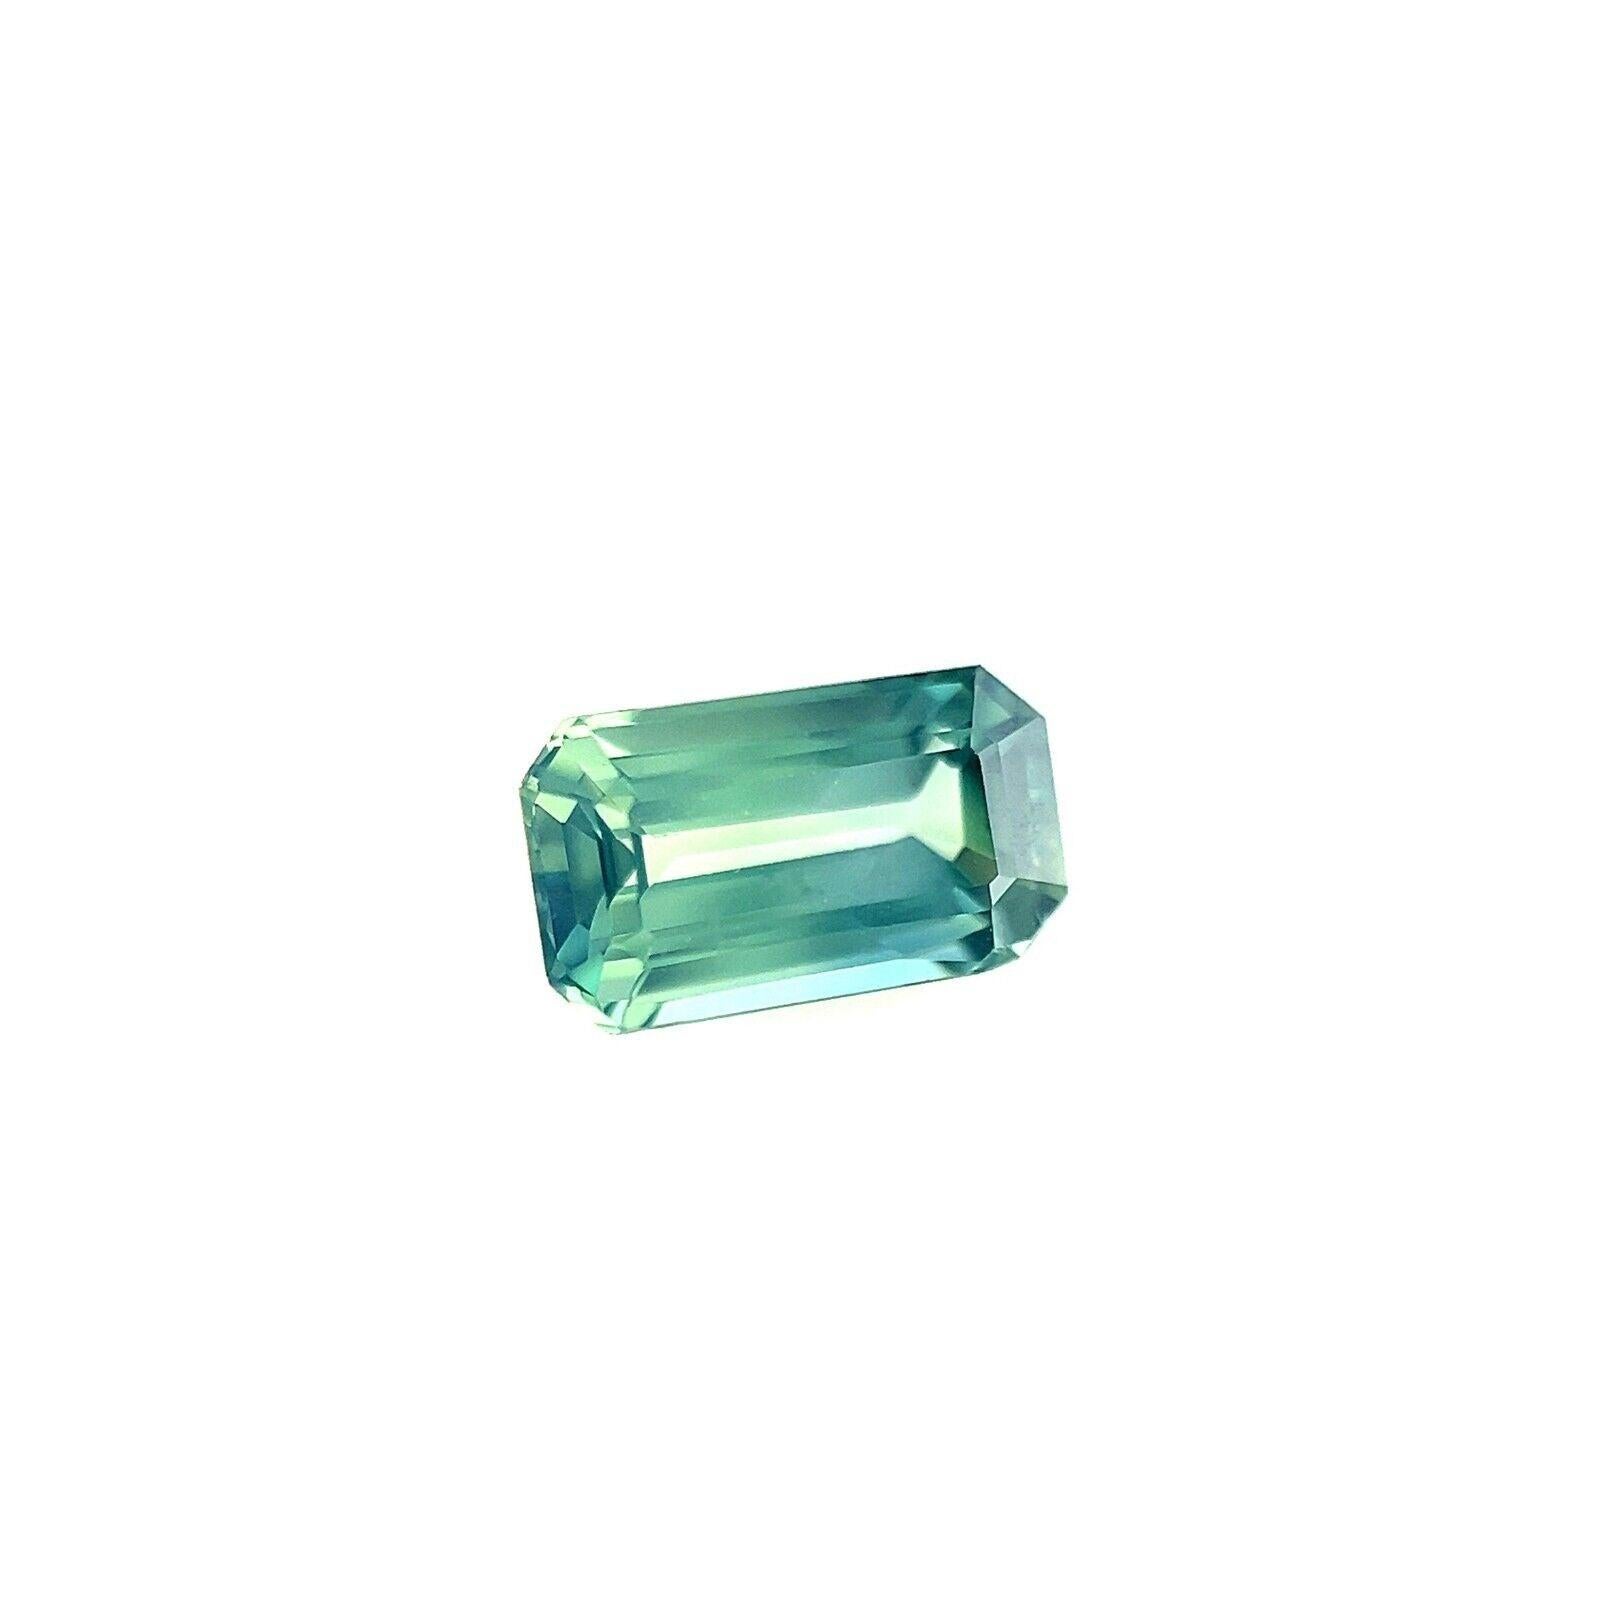 GRA Certified 1.03ct Green Blue Sapphire Untreated Emerald Cut Gem 7.3x4.1mm

GRA Certified Untreated Green Blue Sapphire Gemstone.
1.03 Carat sapphire with a beautiful vivid green blue colour. Fully certified by GRA confirming stone as natural and